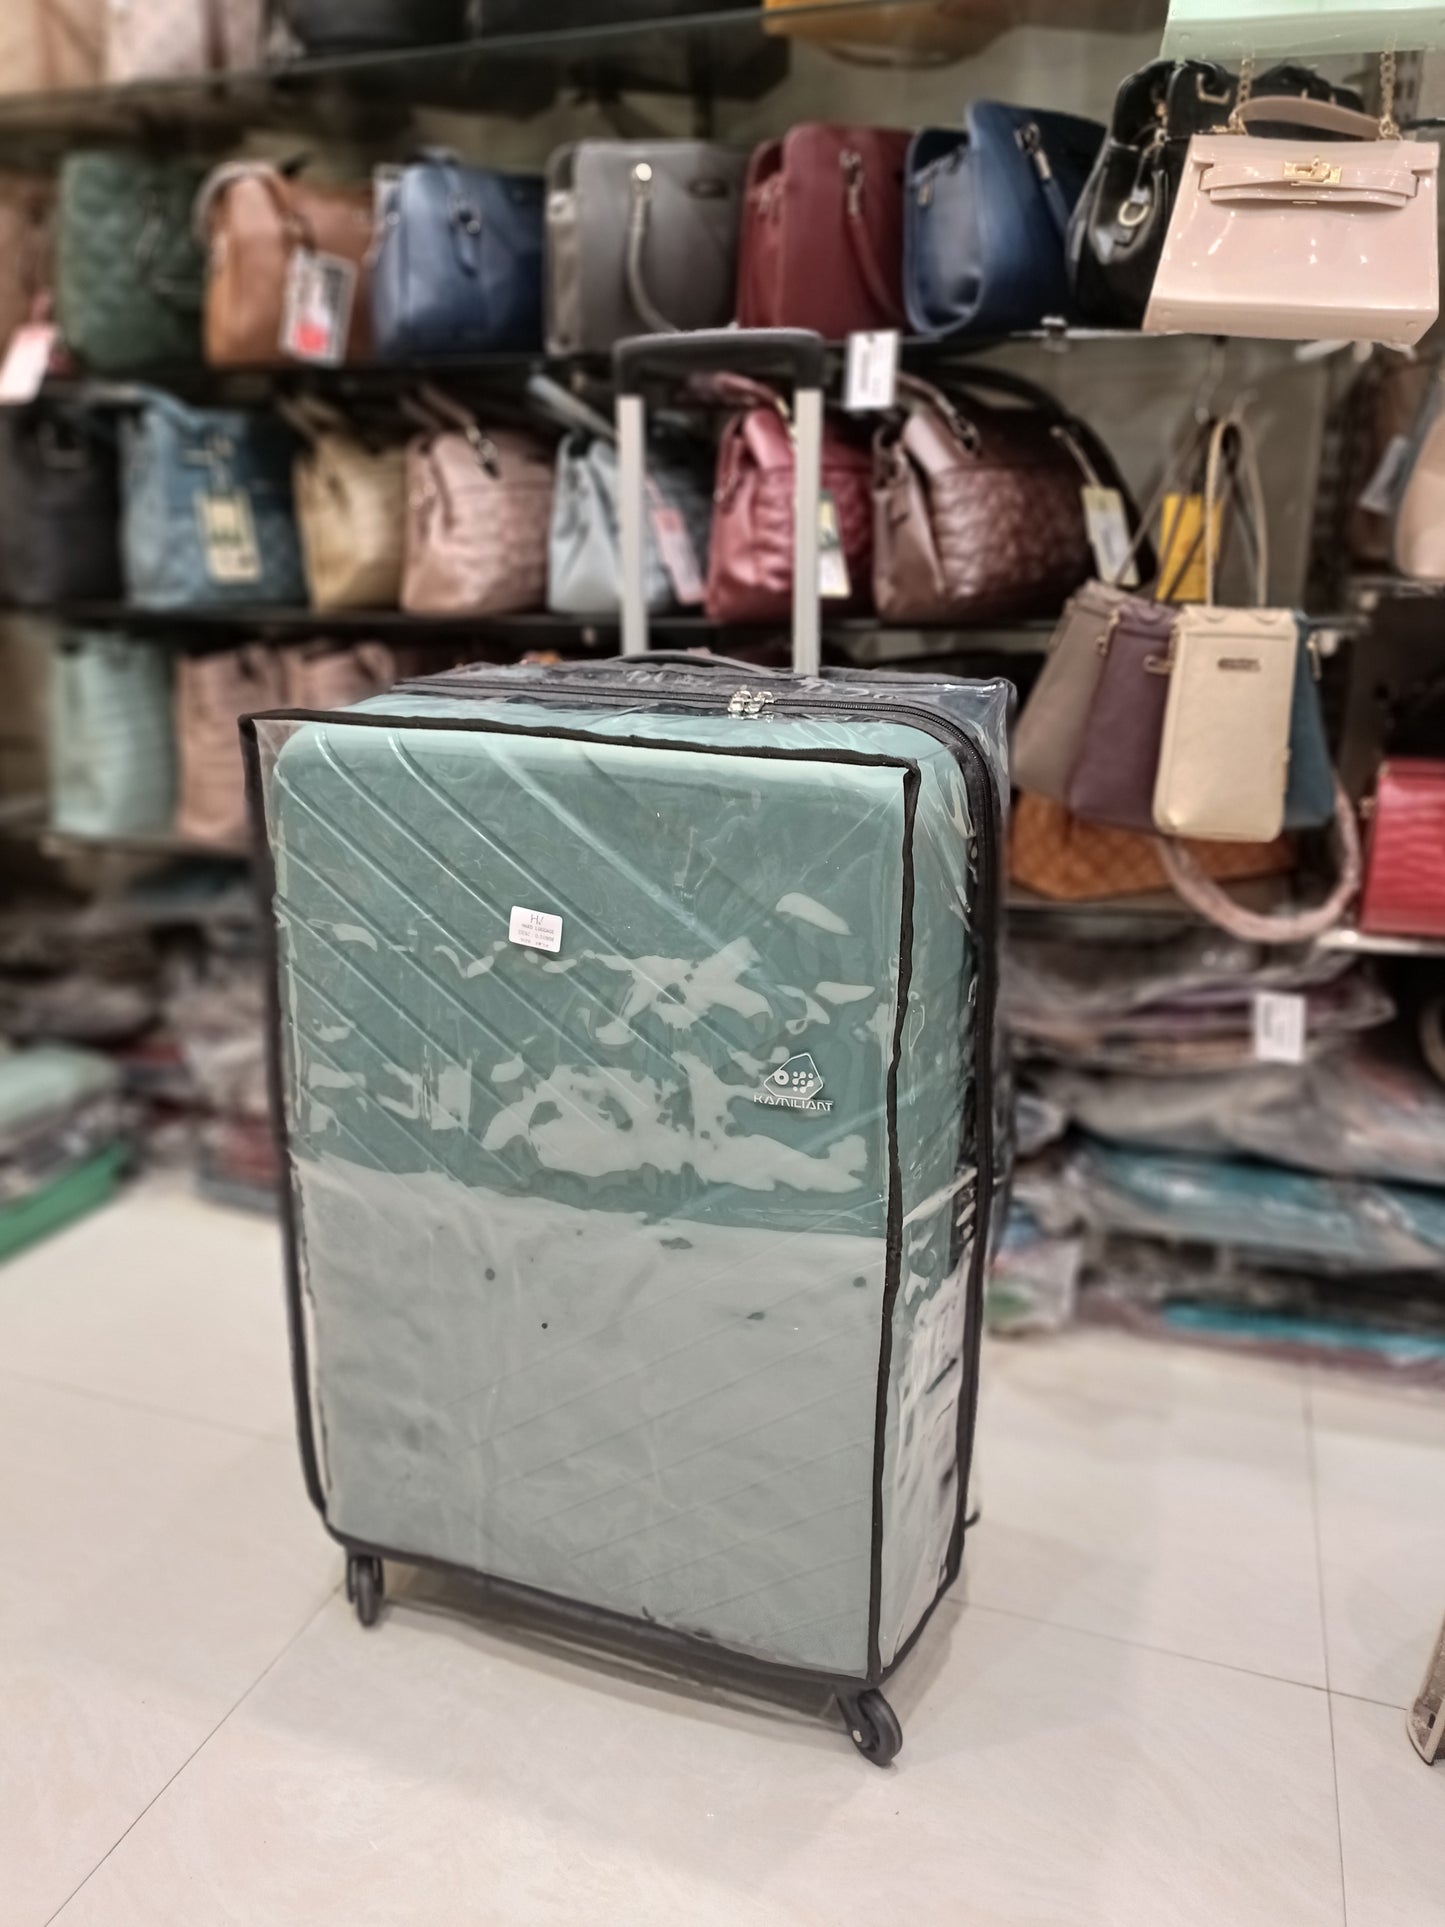 Trolly bag Transparent cover | luggage Protection cover